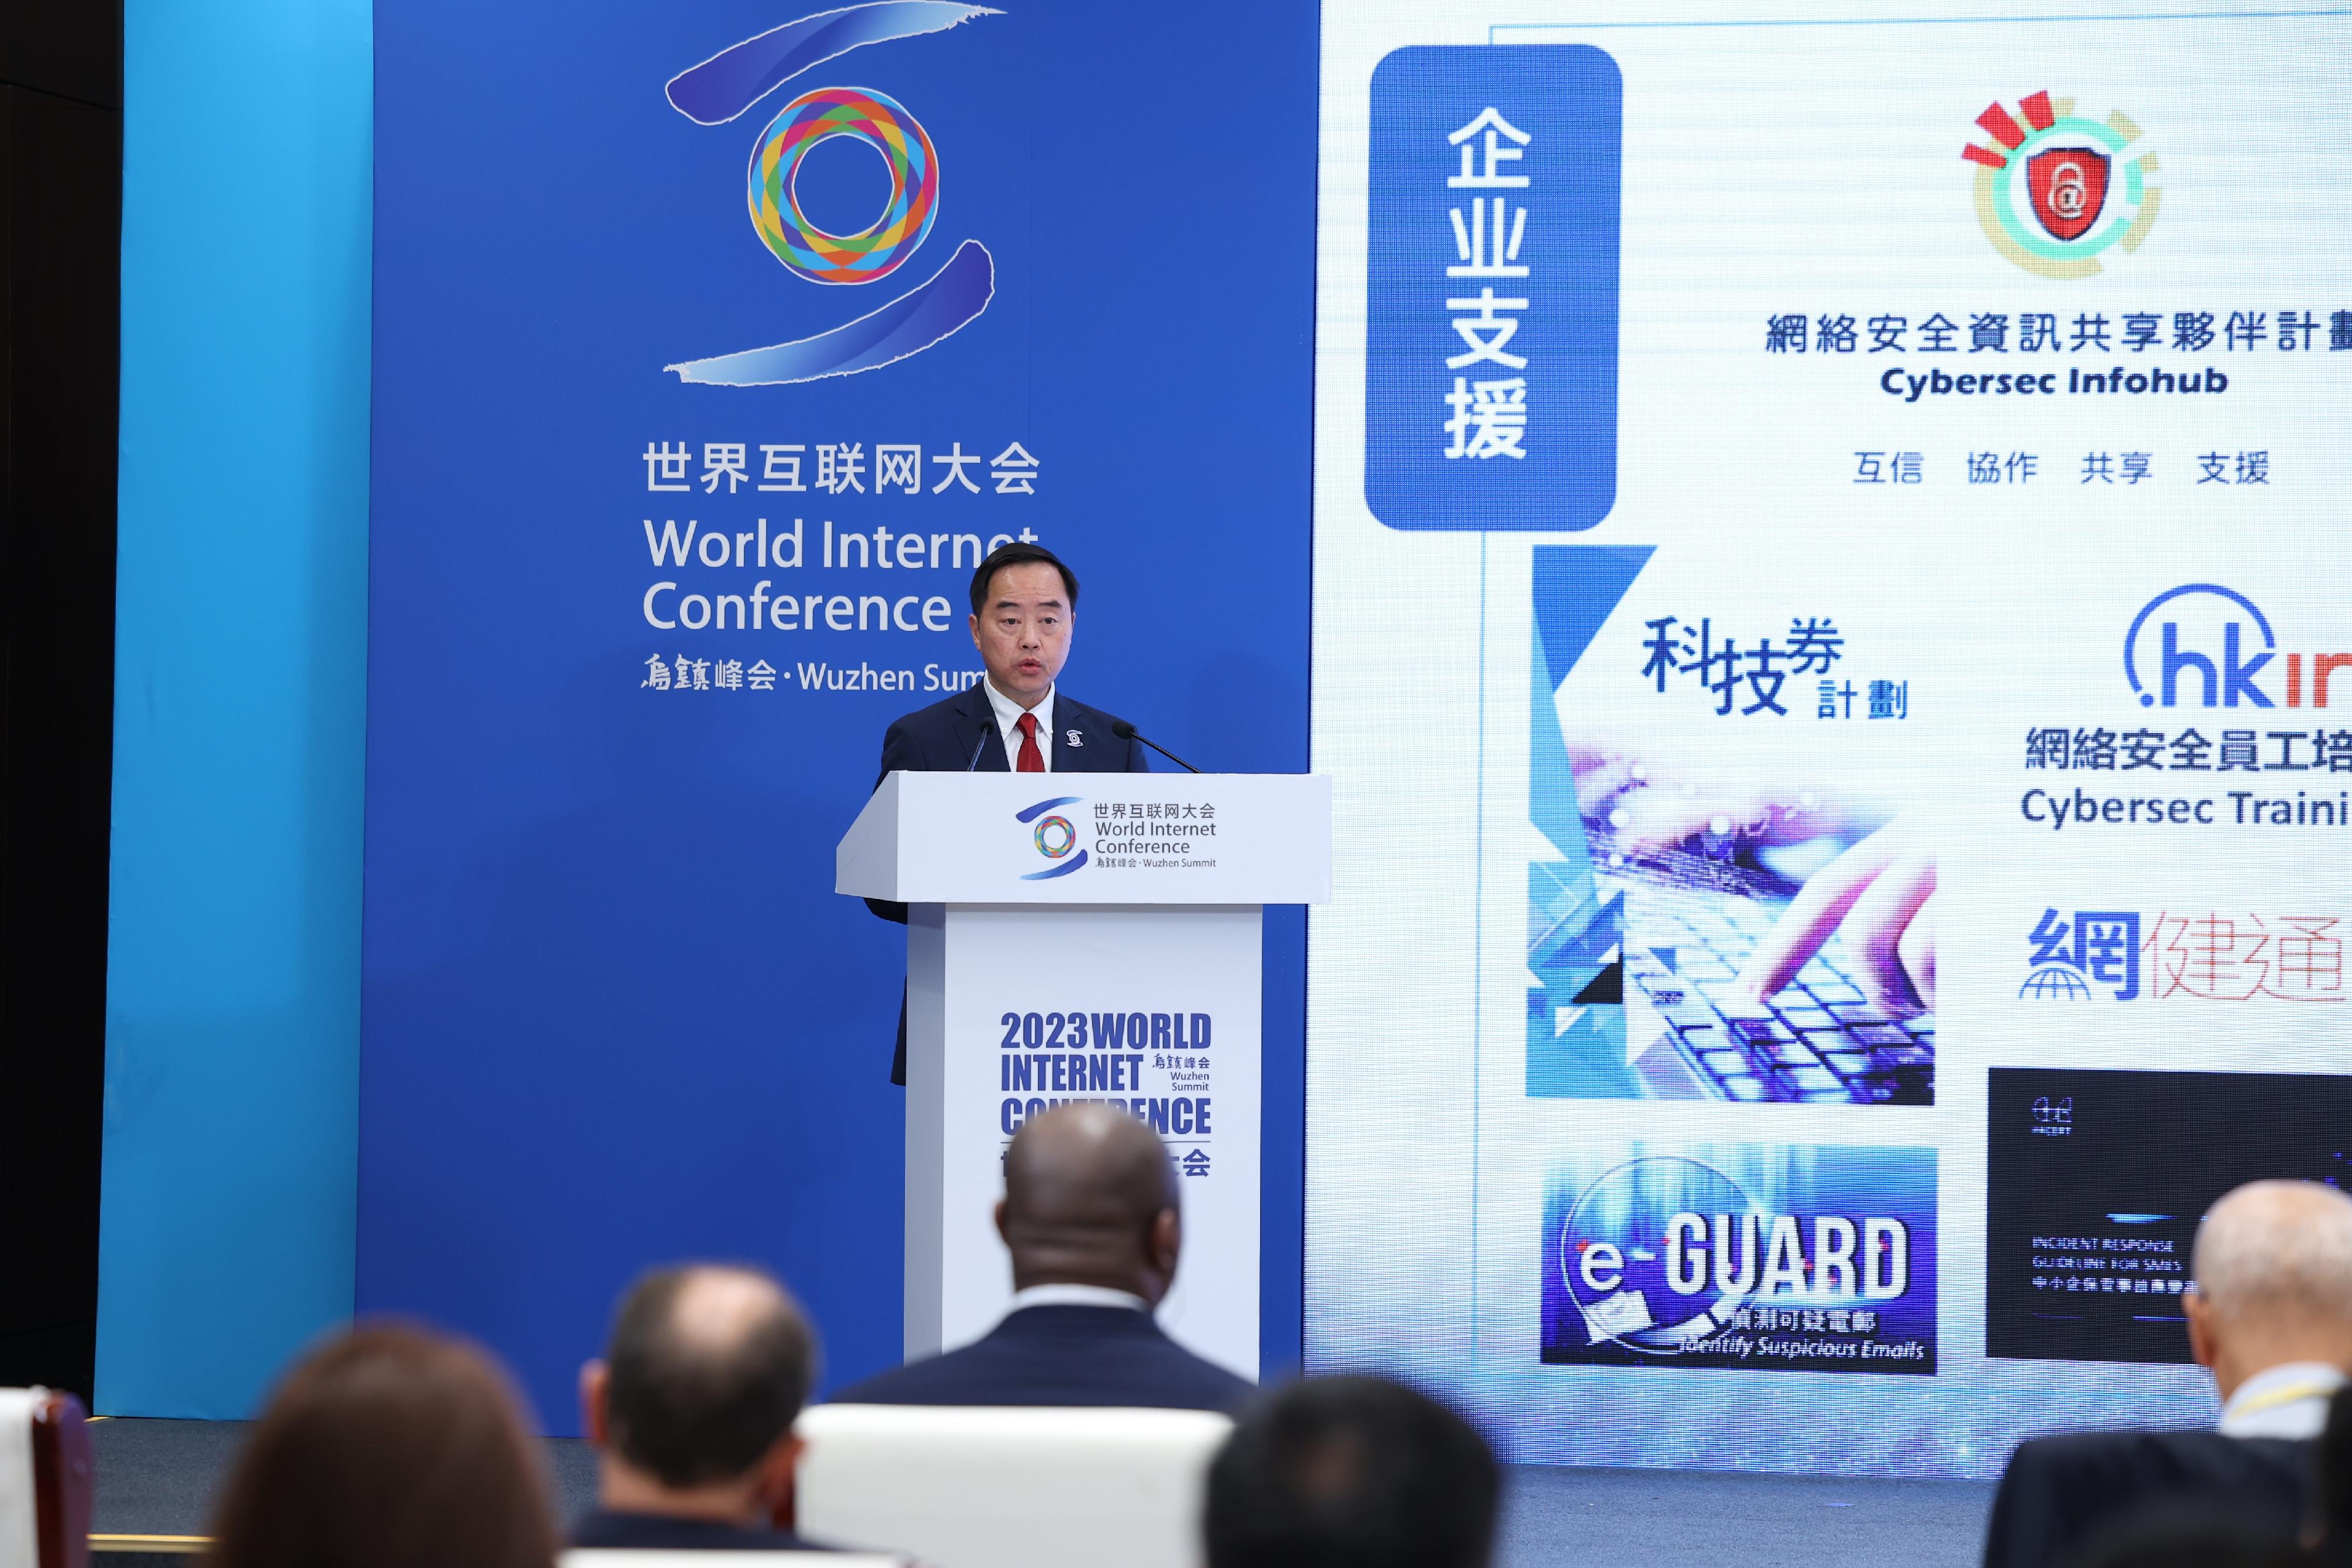 The Government Chief Information Officer, Mr Tony Wong, delivers a keynote speech at the Cybersecurity Forum for Technology Development and International Cooperation of the 2023 World Internet Conference Wuzhen Summit in Zhejiang today (November 9).